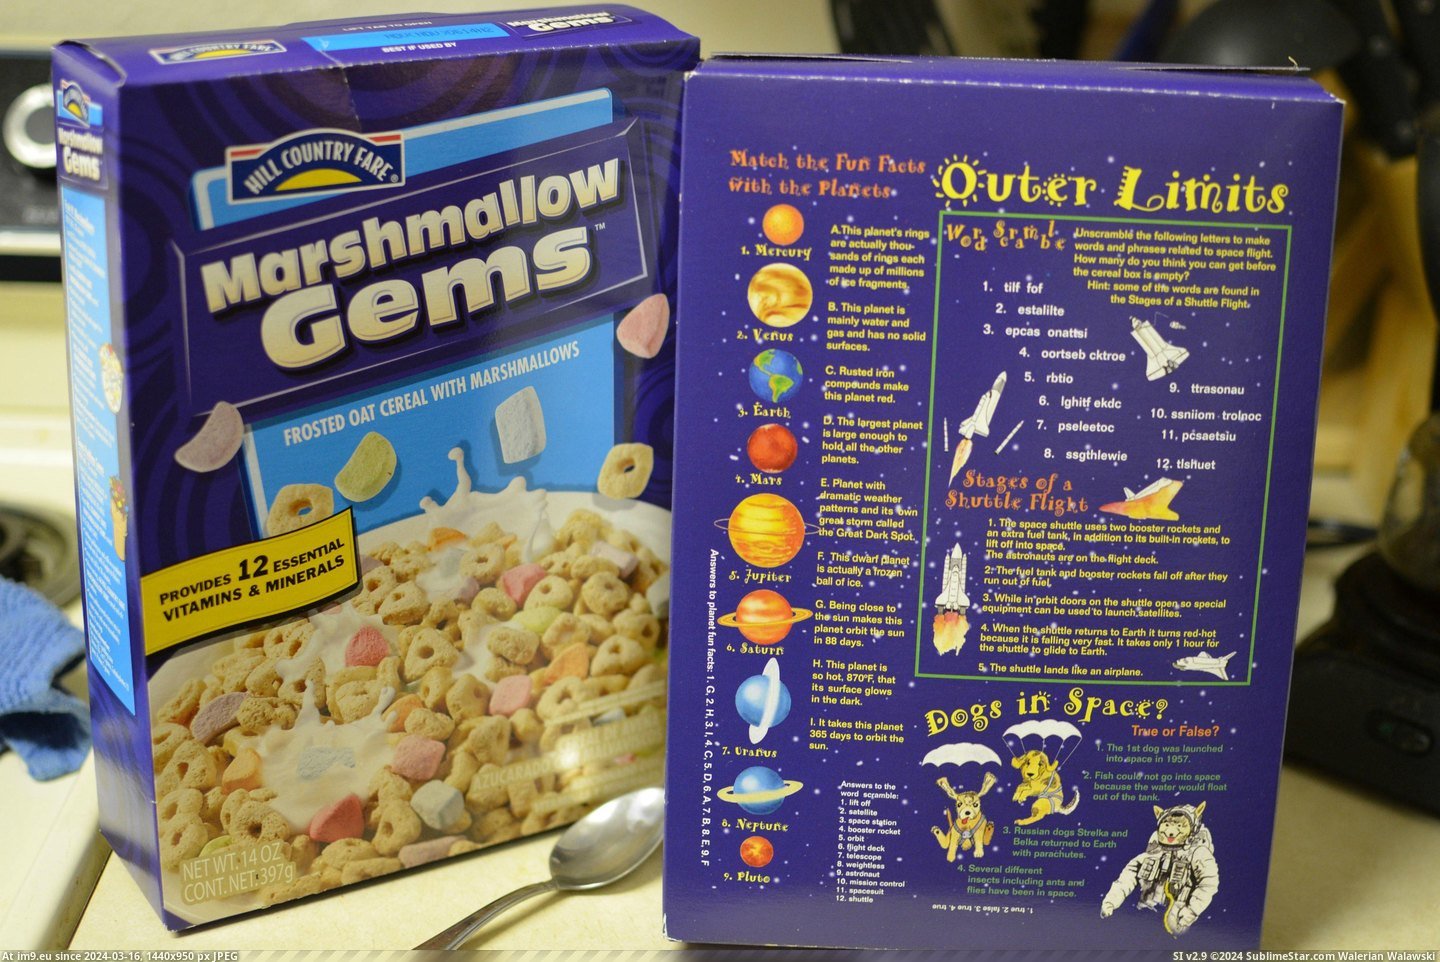 #Box #Planet #Considers #Cereal #Pluto [Mildlyinteresting] The back of my cereal box still considers Pluto a planet. Pic. (Изображение из альбом My r/MILDLYINTERESTING favs))